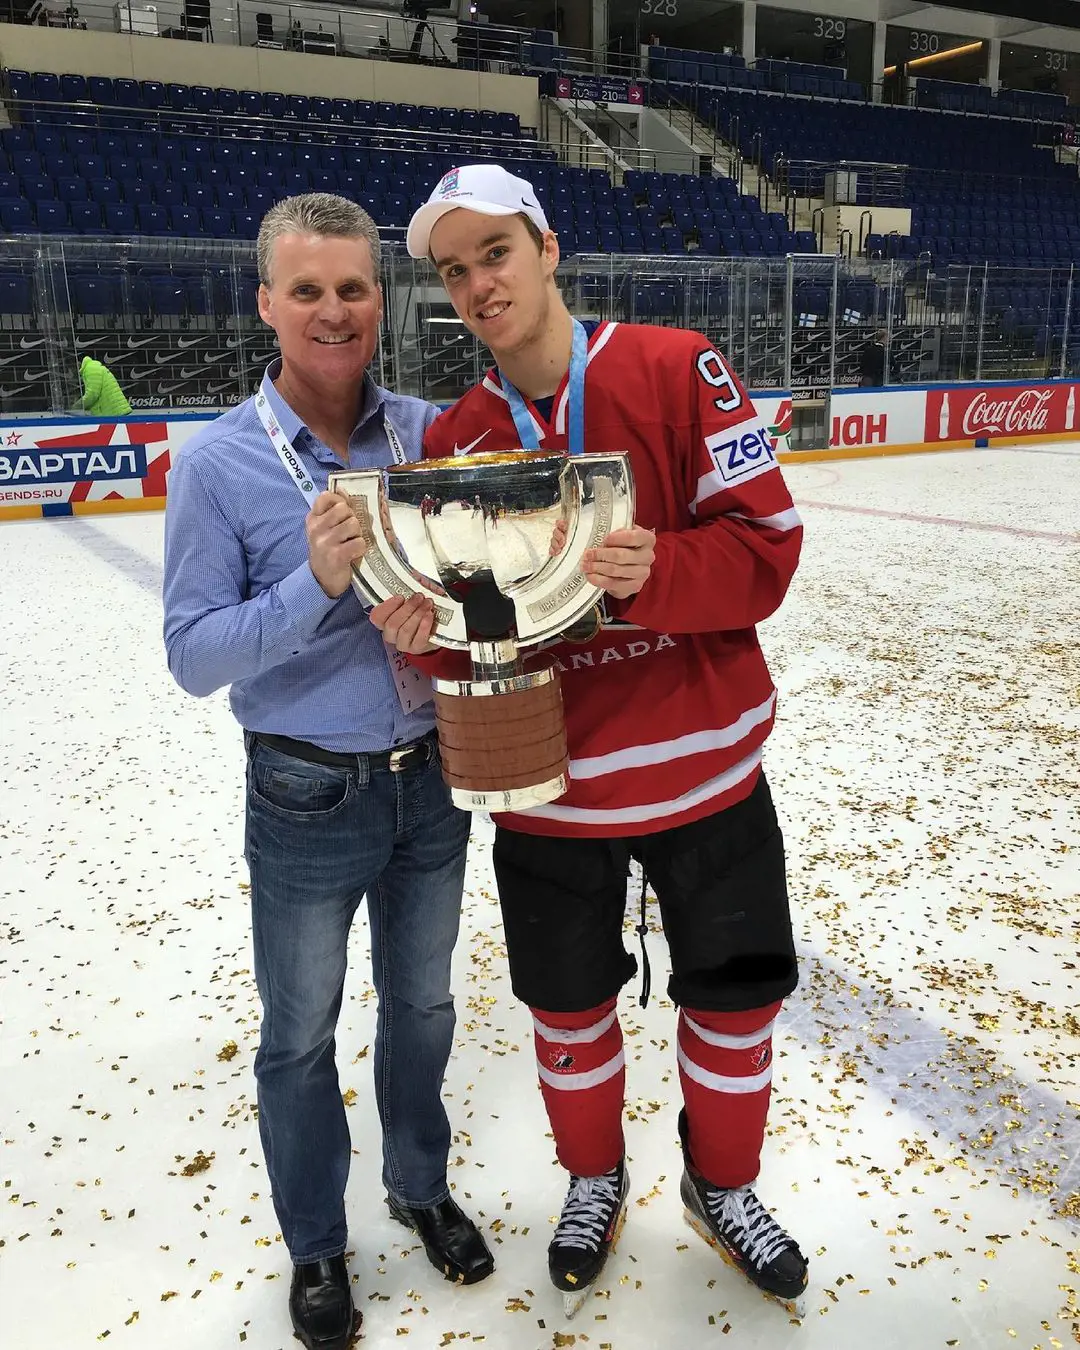 Connor uploaded a picture holding 2016 World Championship Trophy with his father